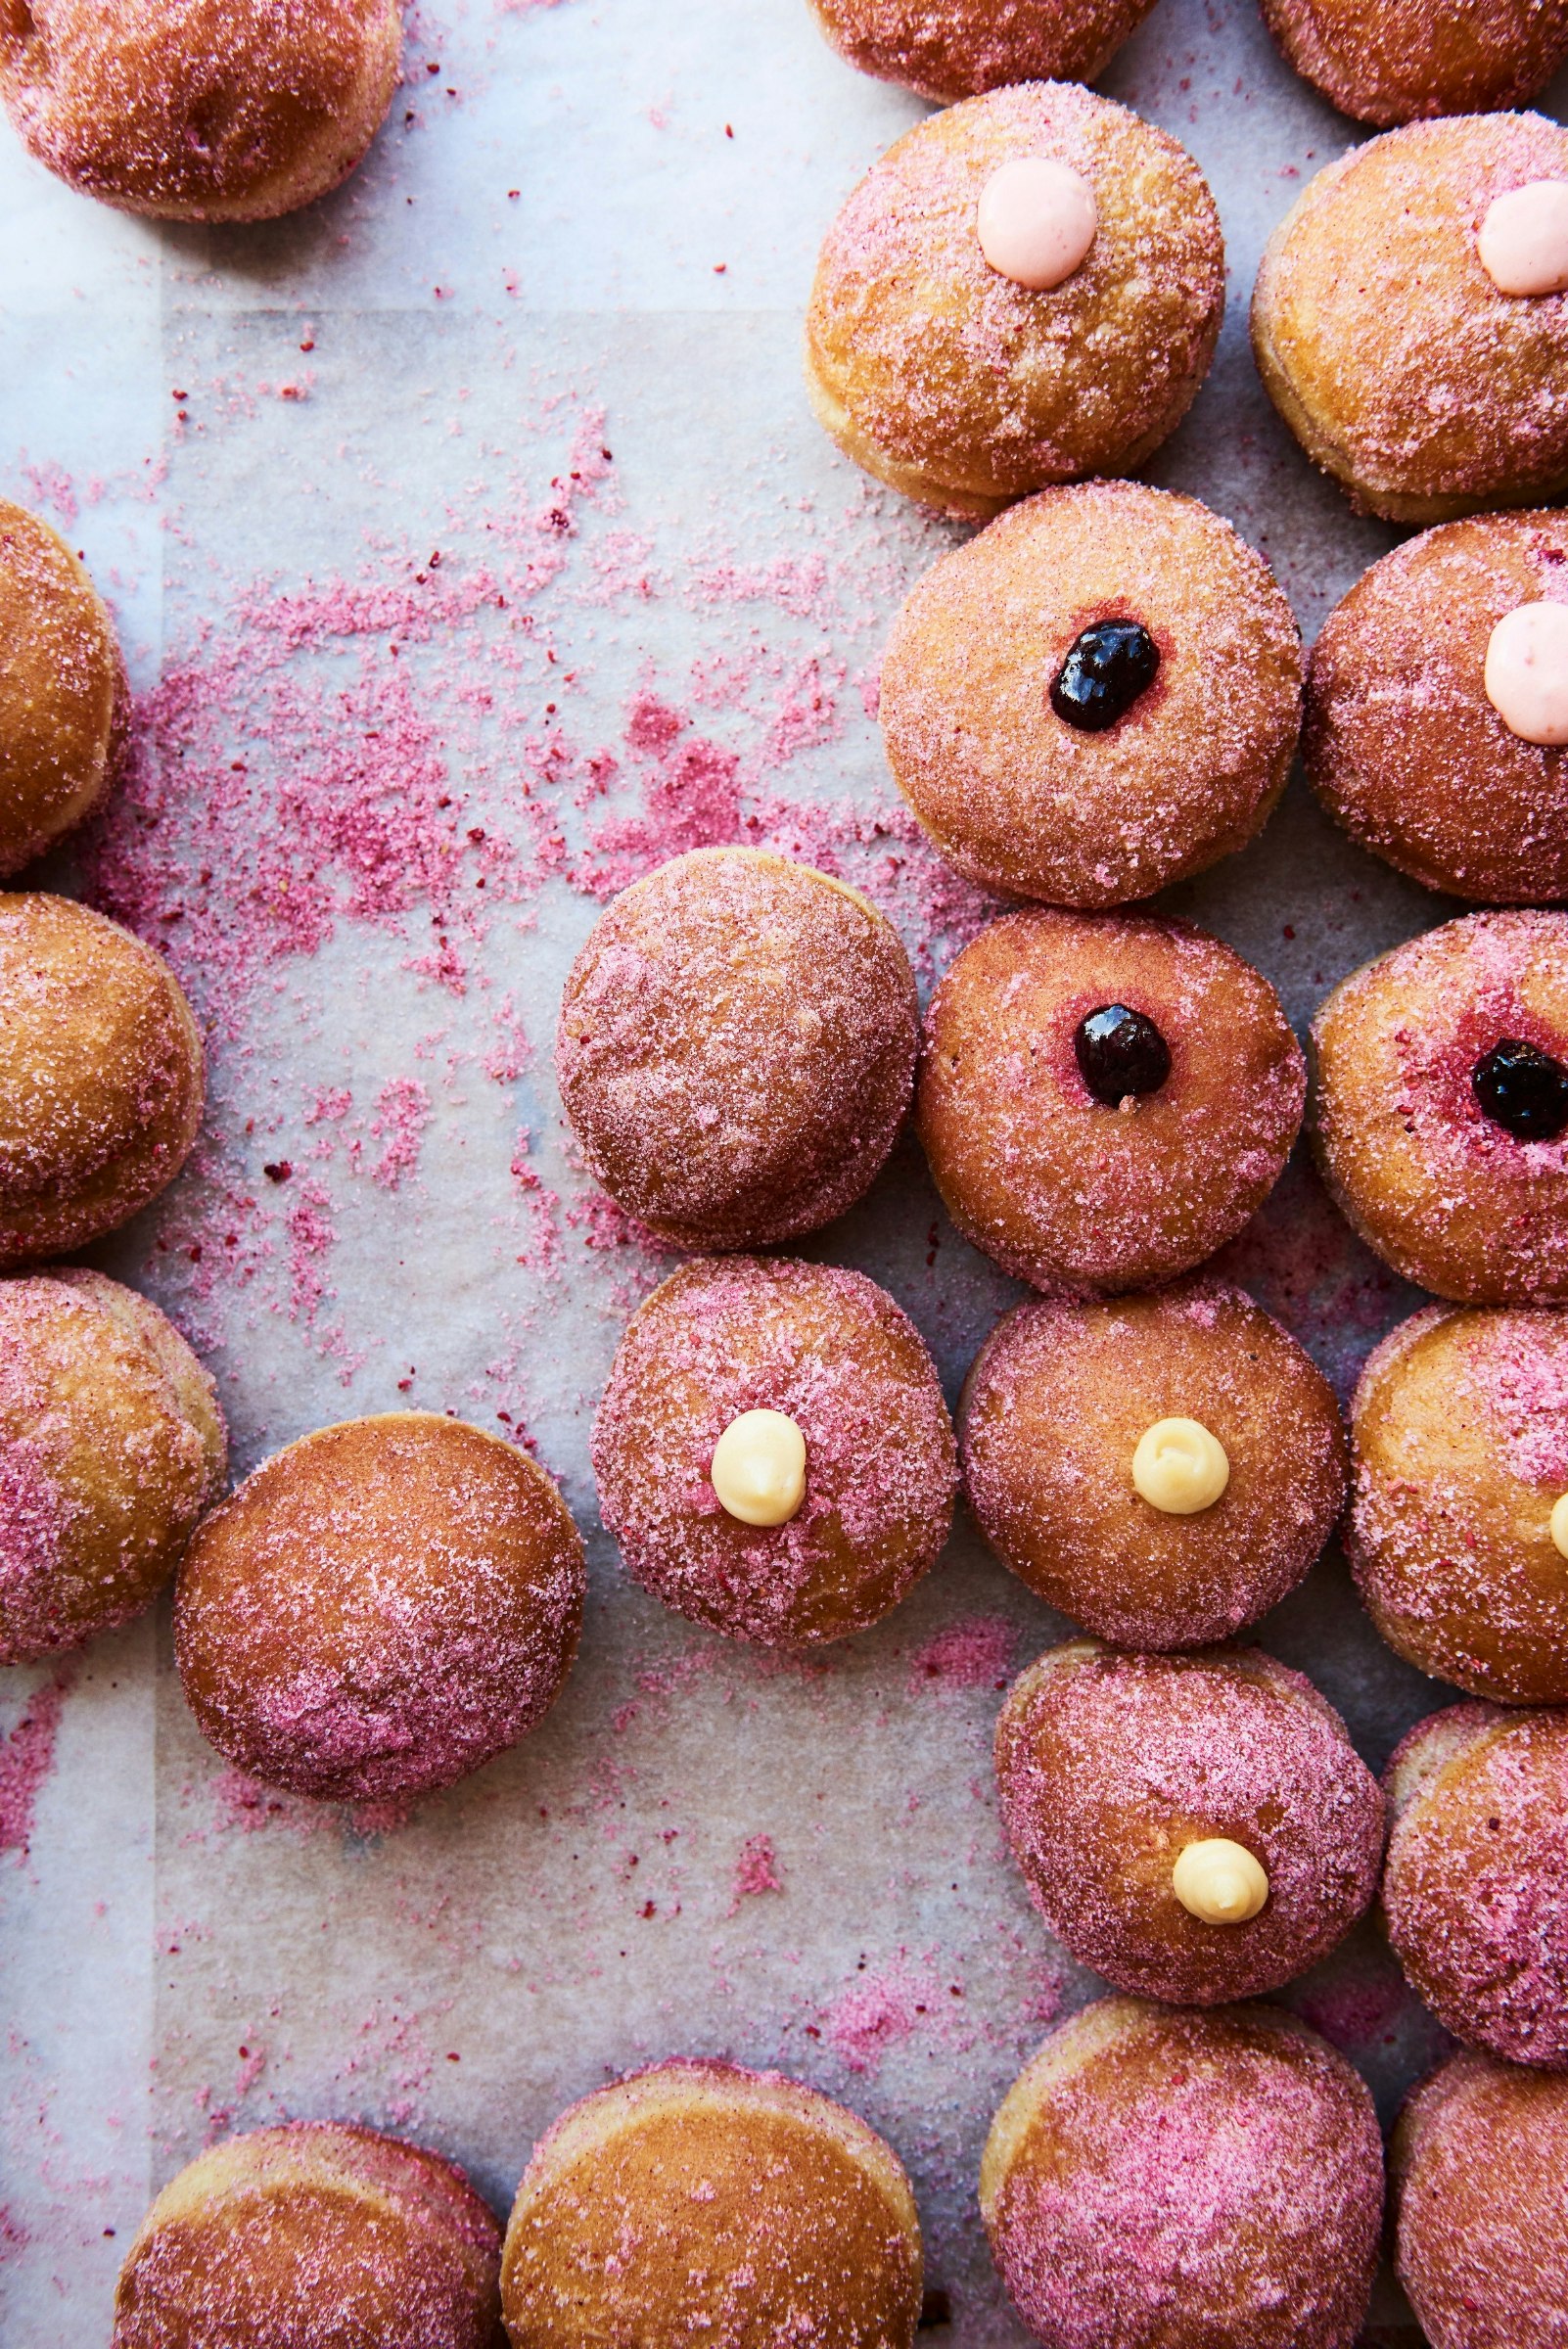 An assortment of sugared doughnuts with blobs of dark-red jam protruding from some and or swirls of yellow custard oozing out of others are lined-up vertically, with a trace of fallen sugar granules showing where other doughnuts would have stood but have now gone 